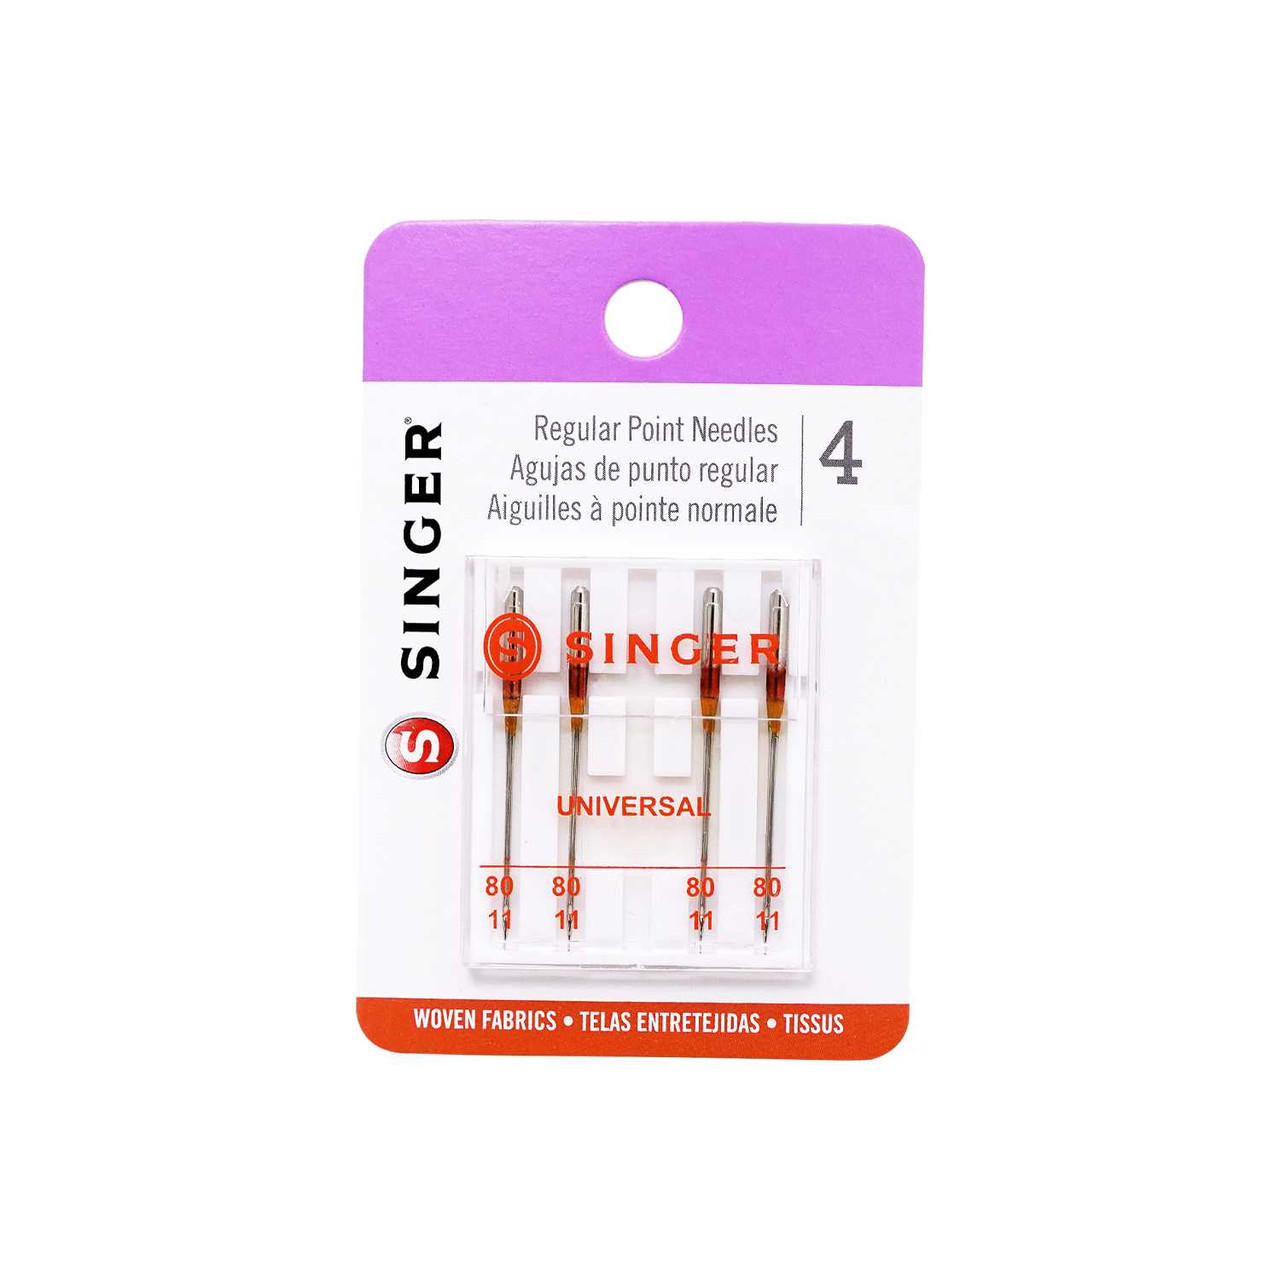 Singer Red Band Sewing Machine Needles Size 80/11